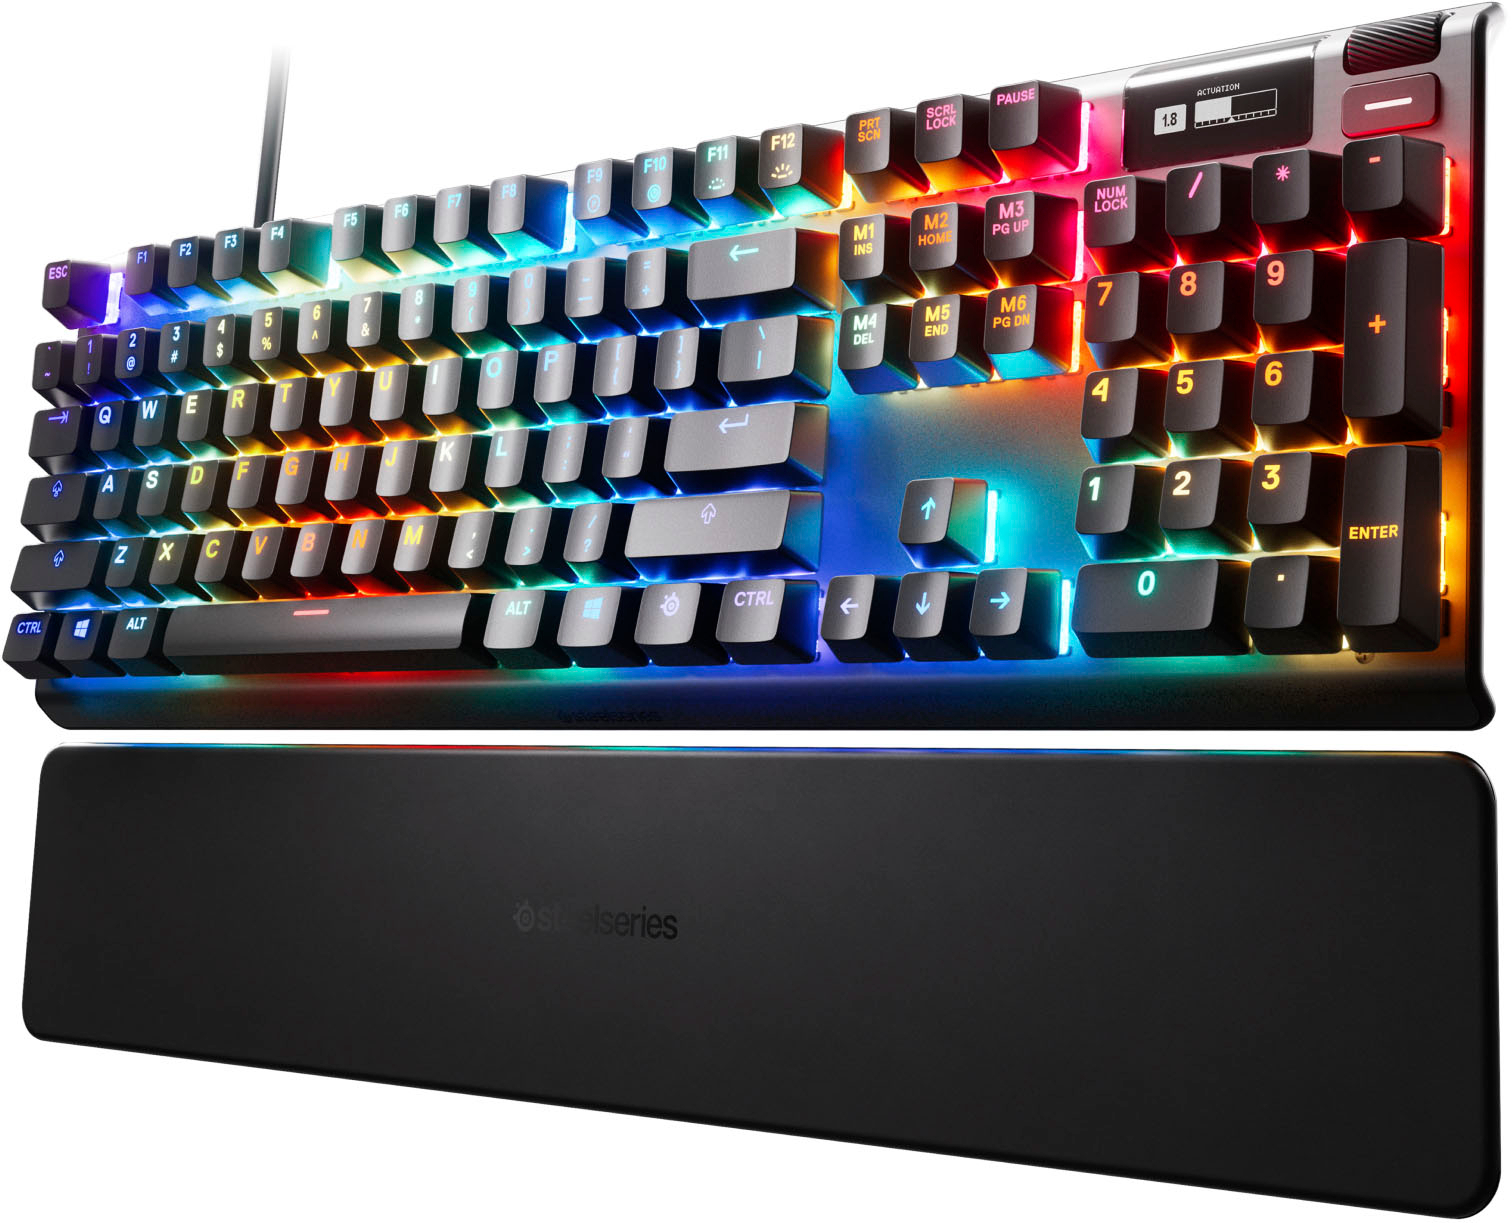 RGB Backlit World’s Fastest Mechanical Keyboard OLED Smart Display Adjustable Actuation Switches SteelSeries Apex Pro Mechanical Gaming Keyboard 